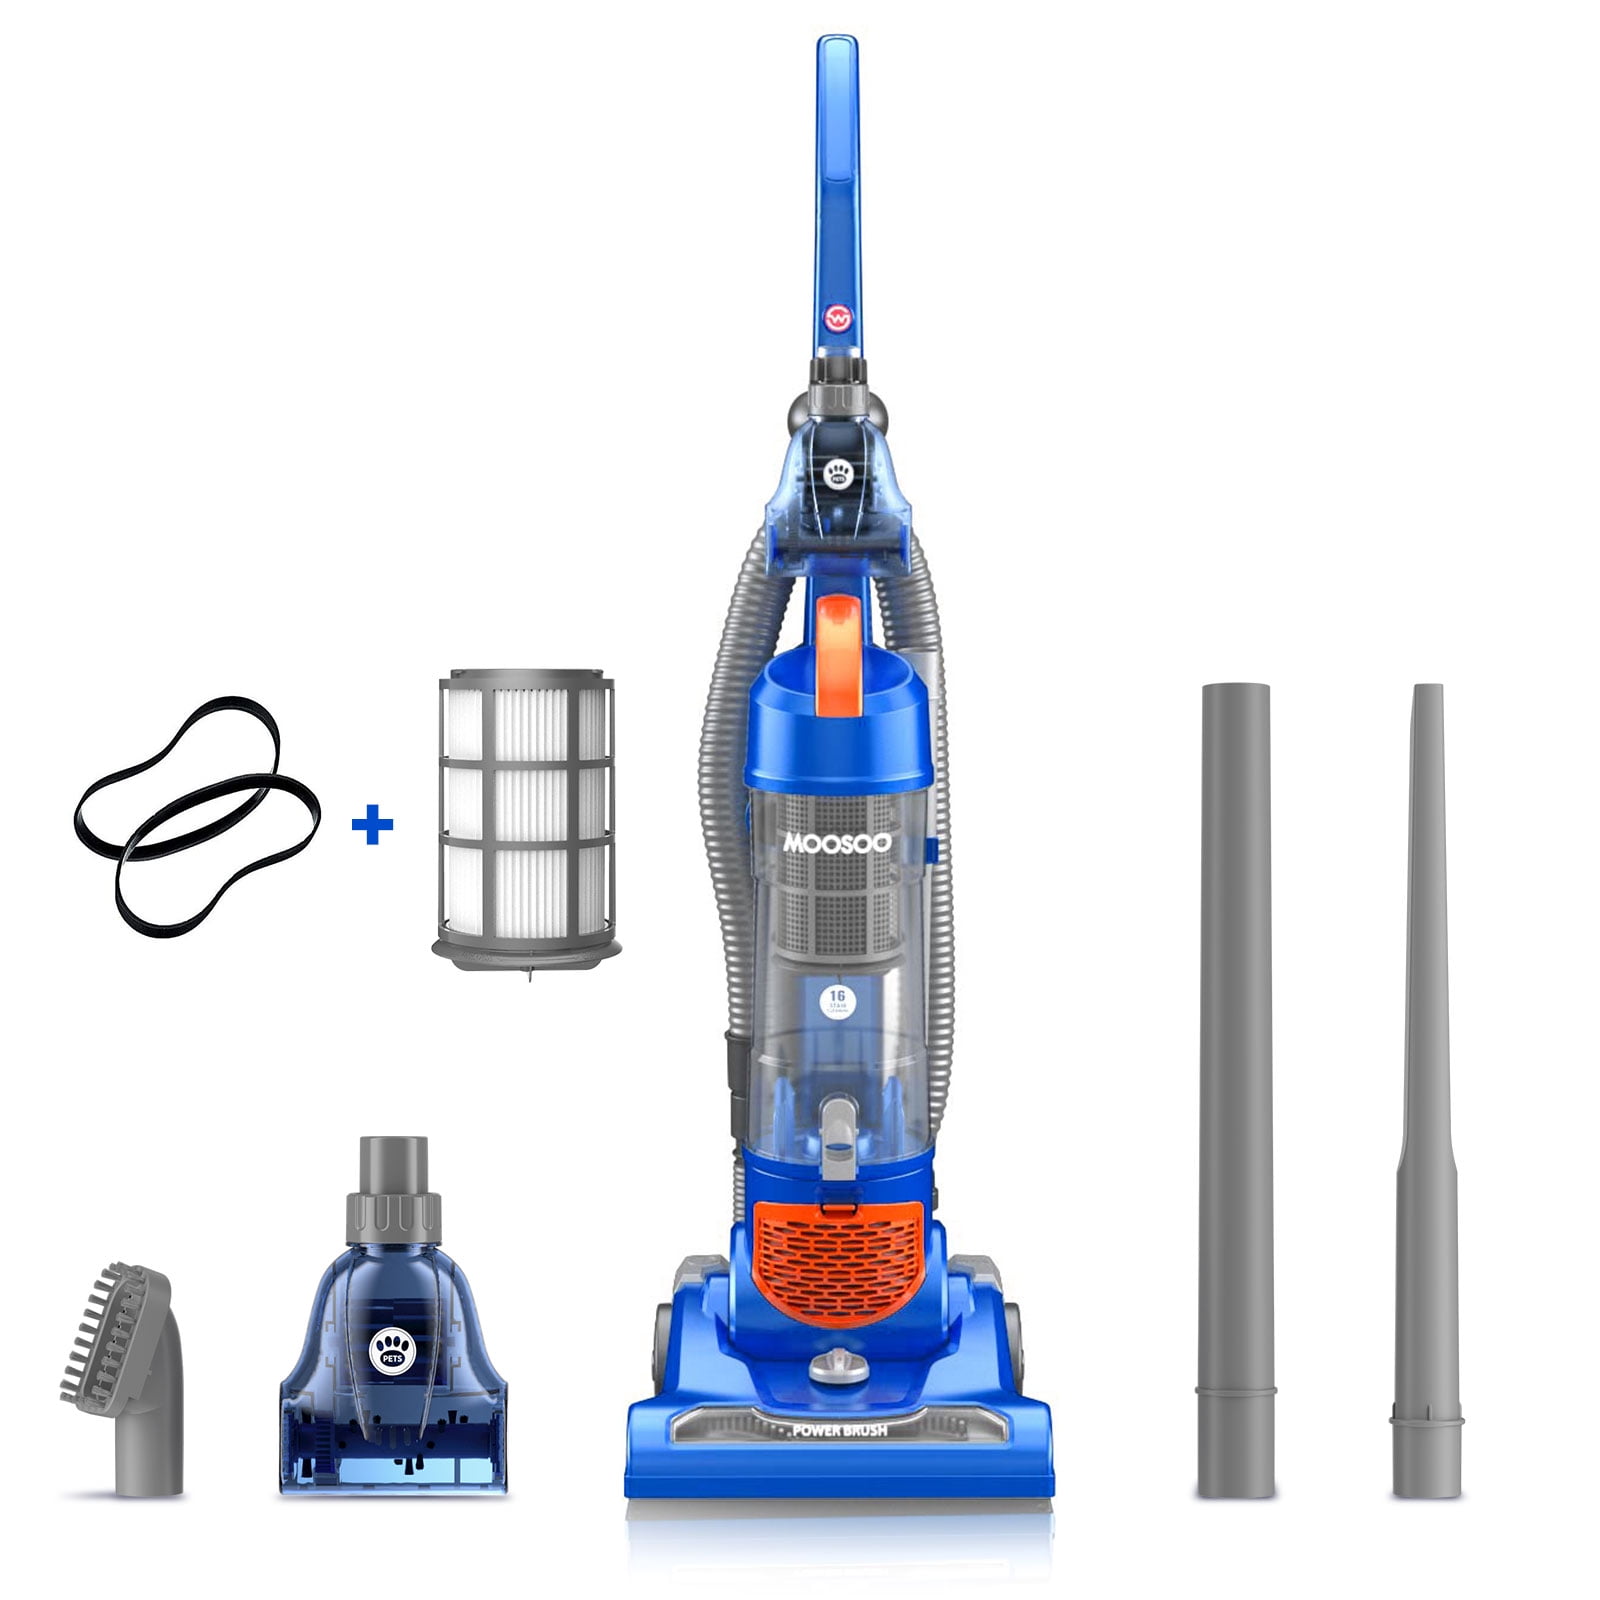 MOOSOO 5 Max Performance Upright Vacuum Cleaner, 1400W Strong Suction for Carpet, Pet, Hard